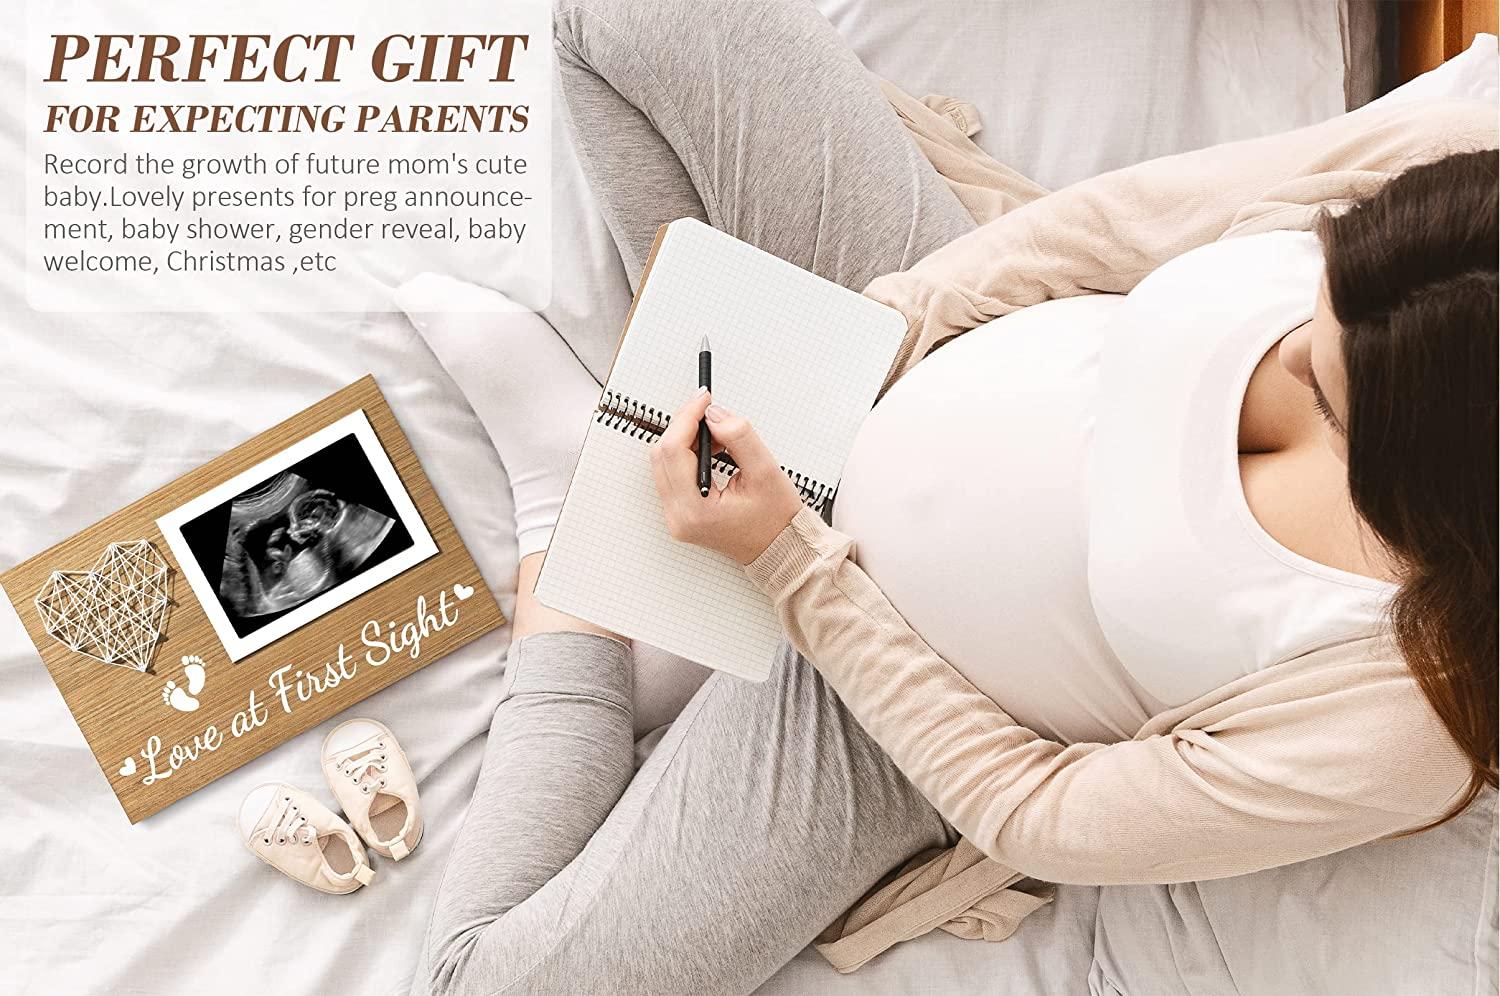 Gifts For New Parents, Best Gifts For Expecting Parents